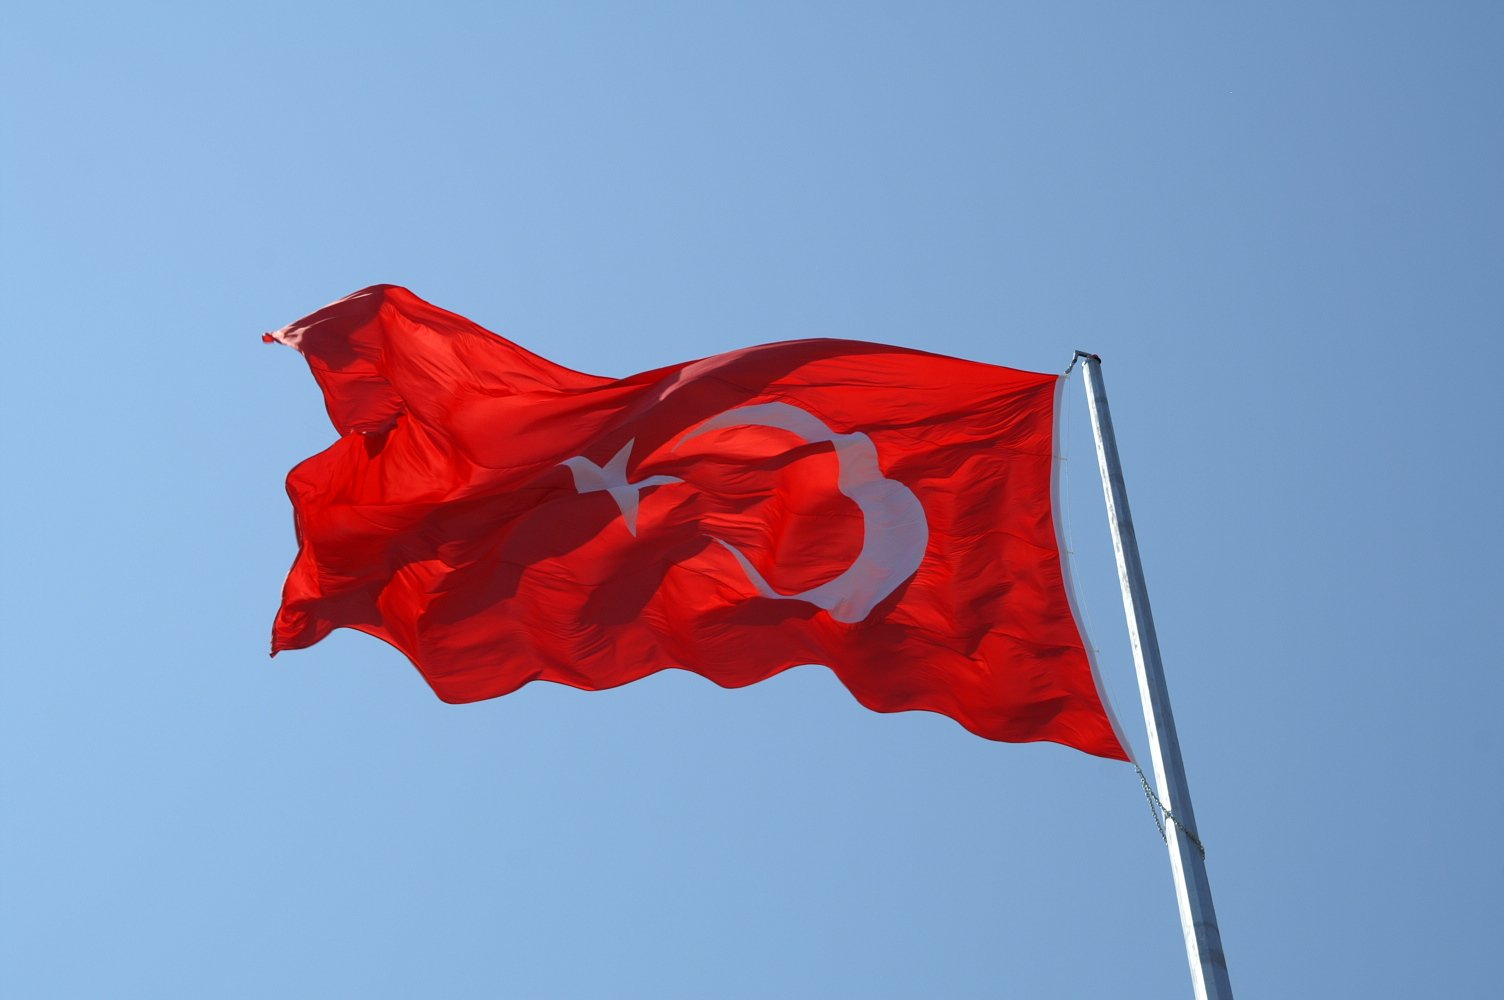 a red flag flying on top of a pole in the blue sky